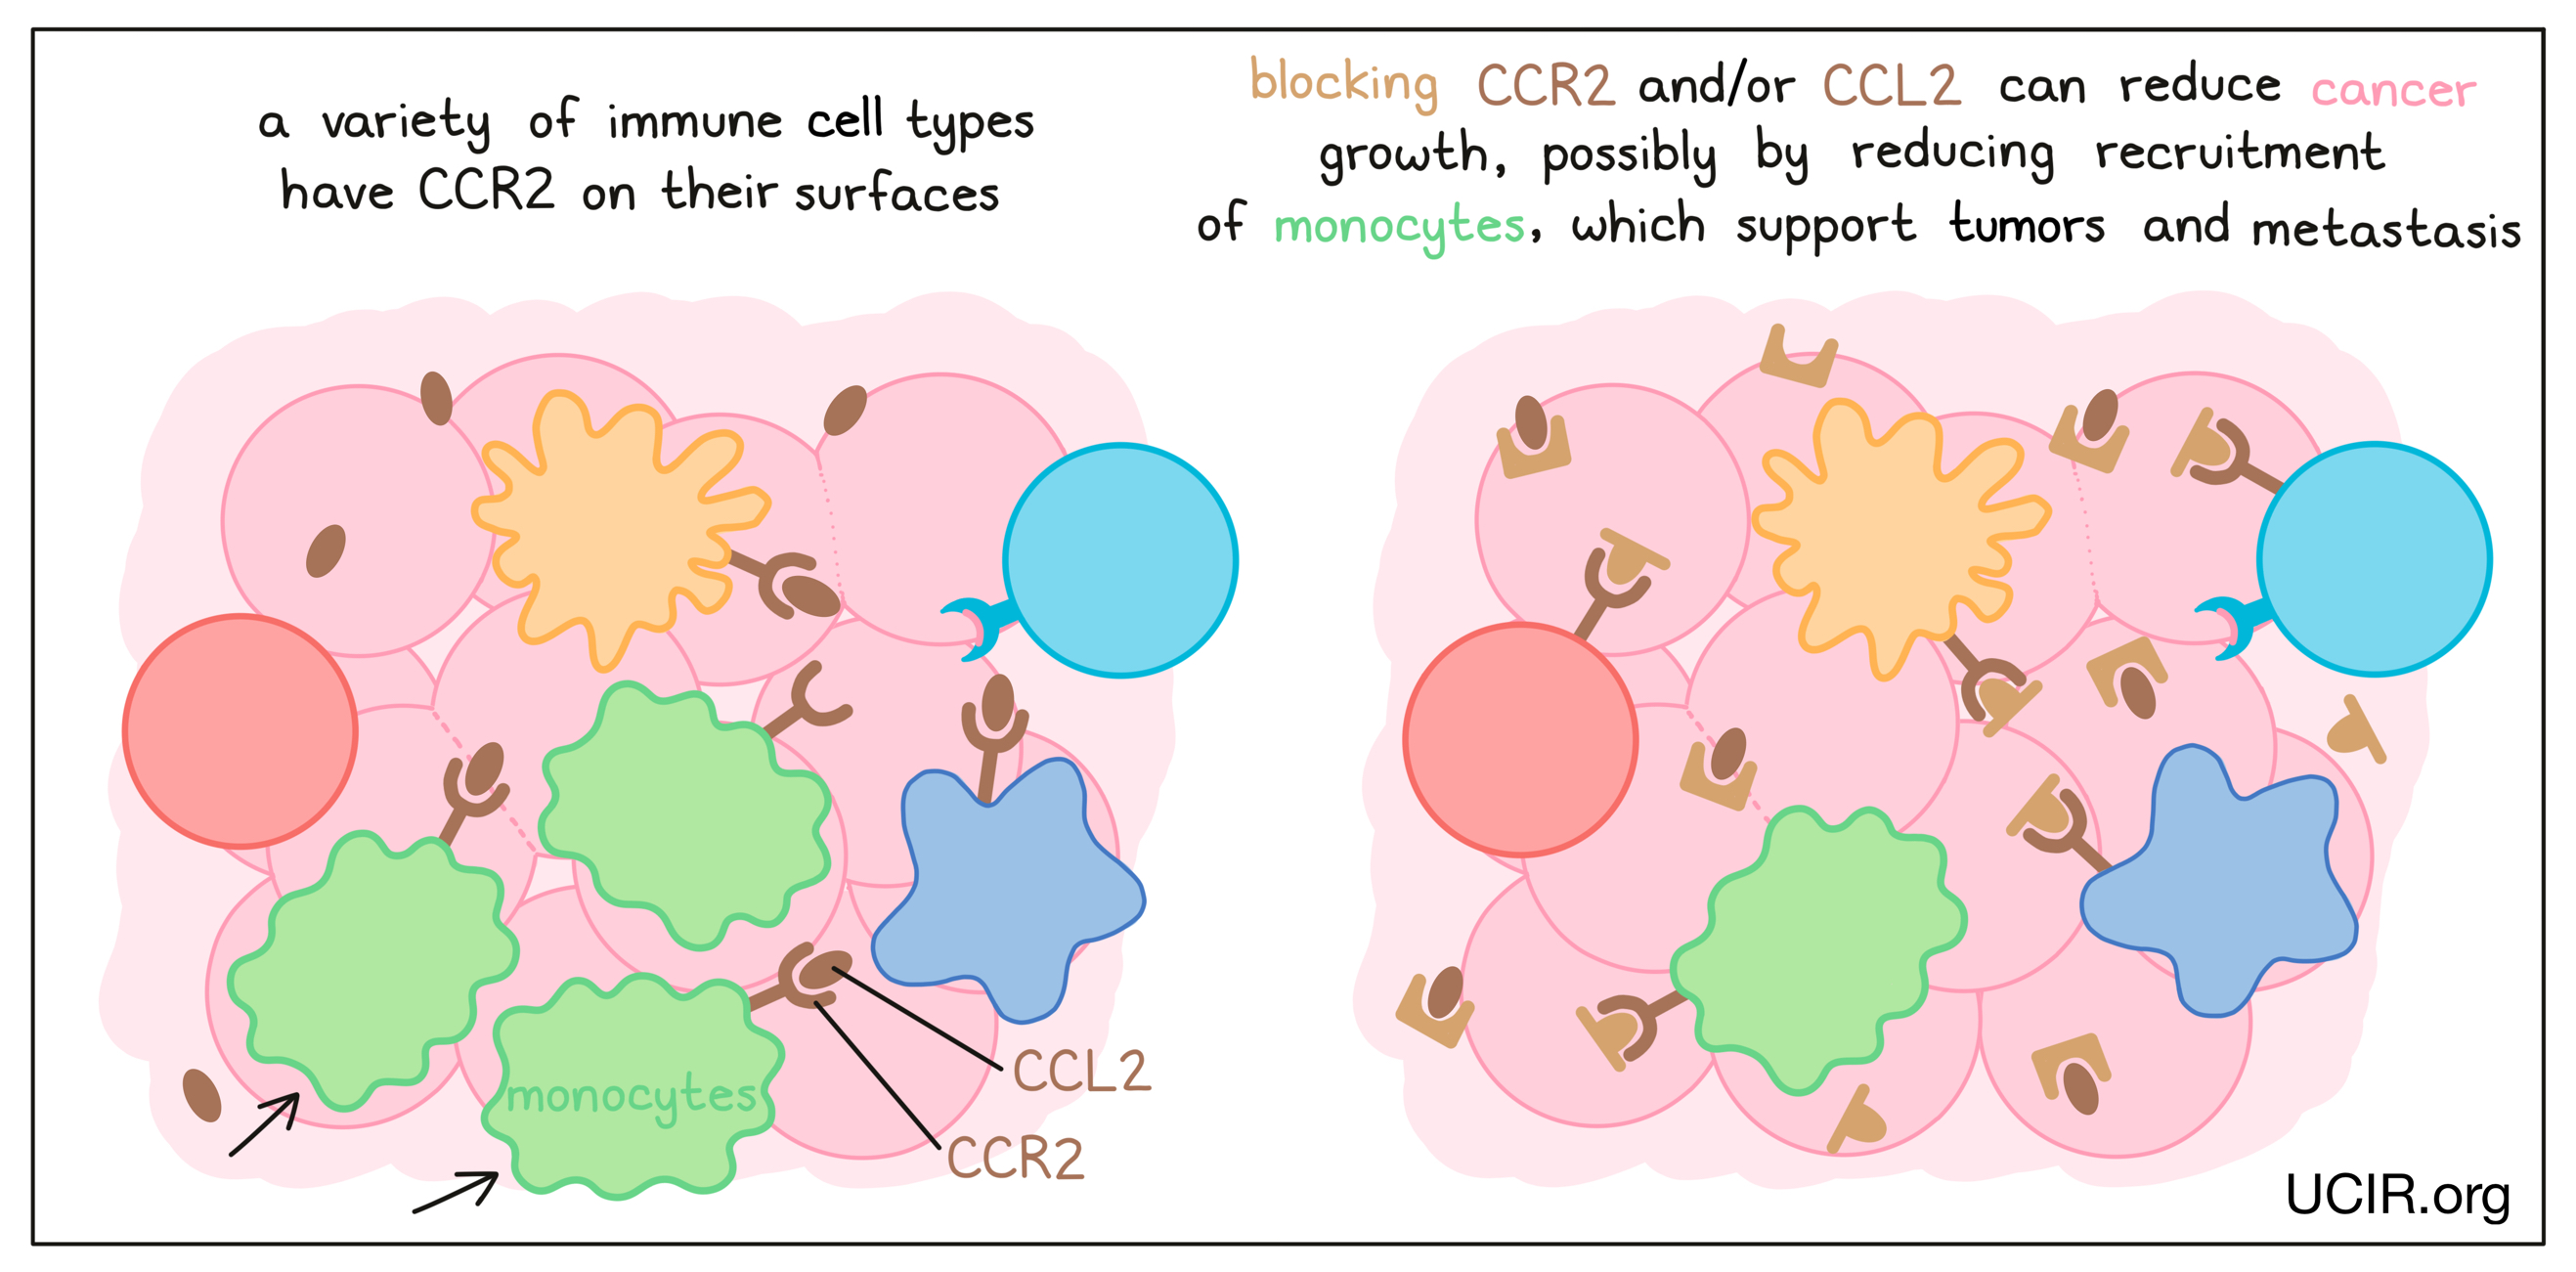 Illustration showing what blocking CCR2 and/or CCL2 does